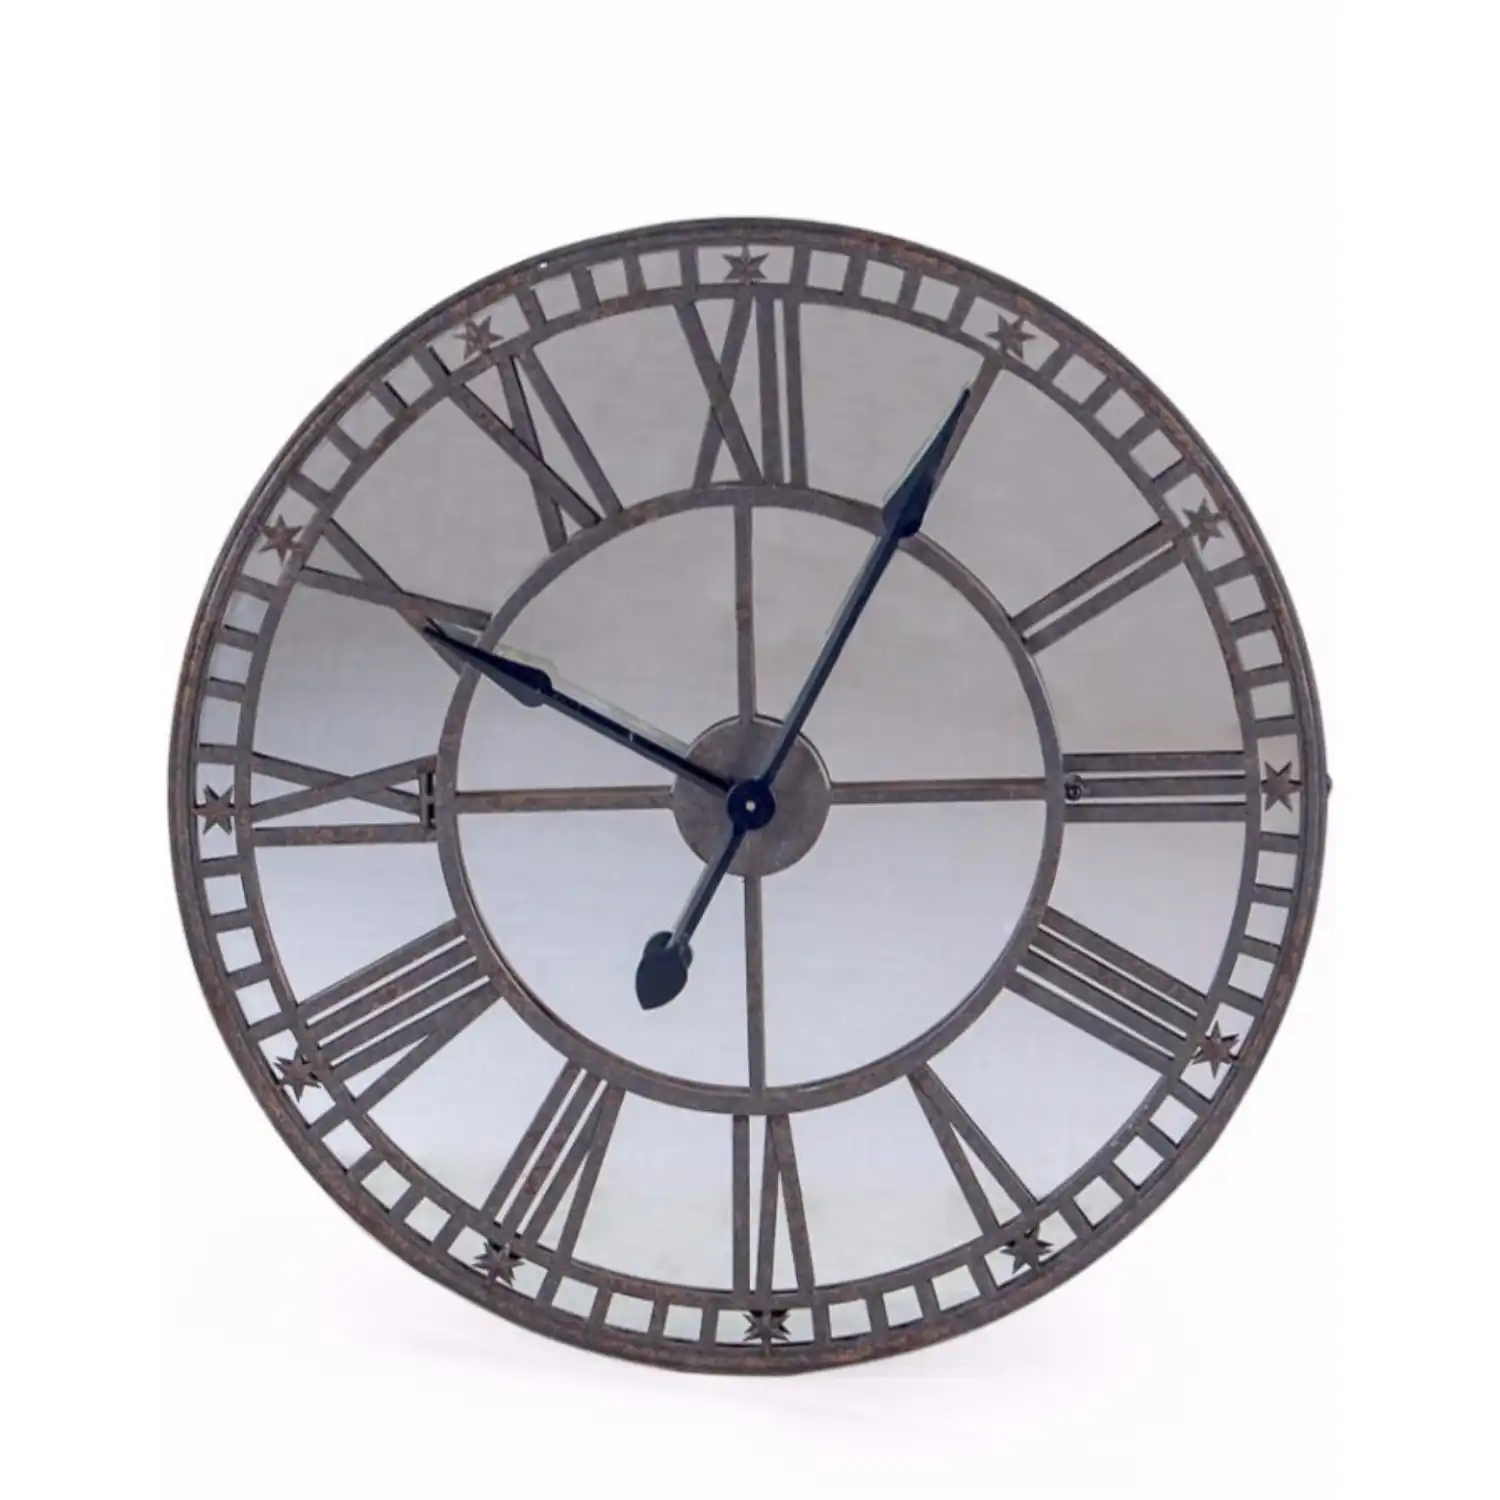 Grey Metal Round Wall Clock with Mirrored Face